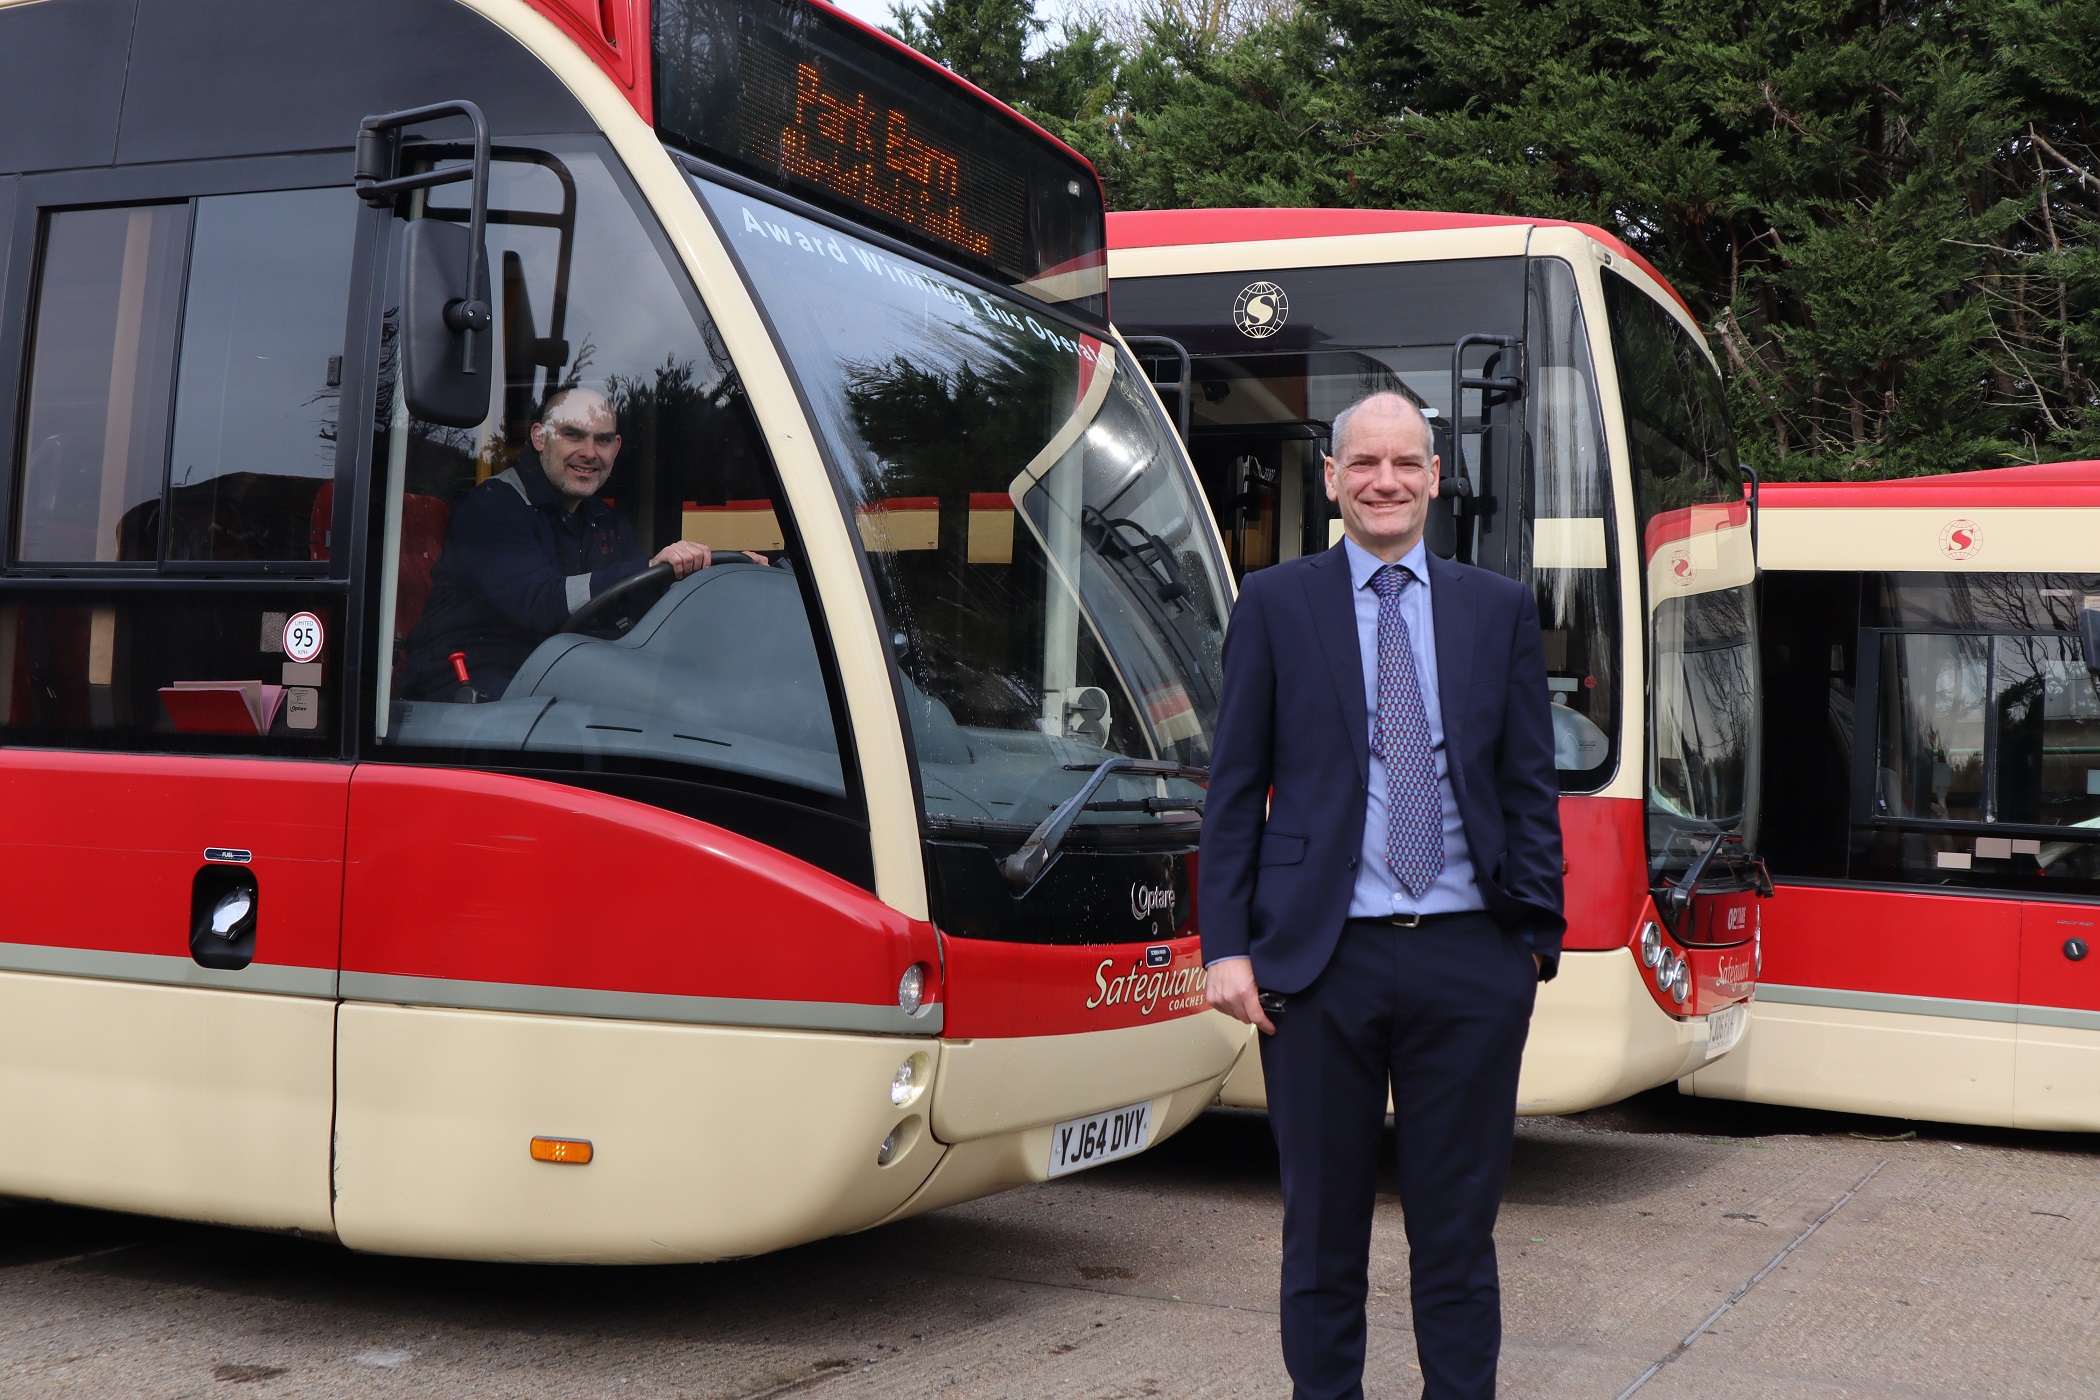 Returning to commercial bus fare scale after £2 cap ends will be exceptionally difficult